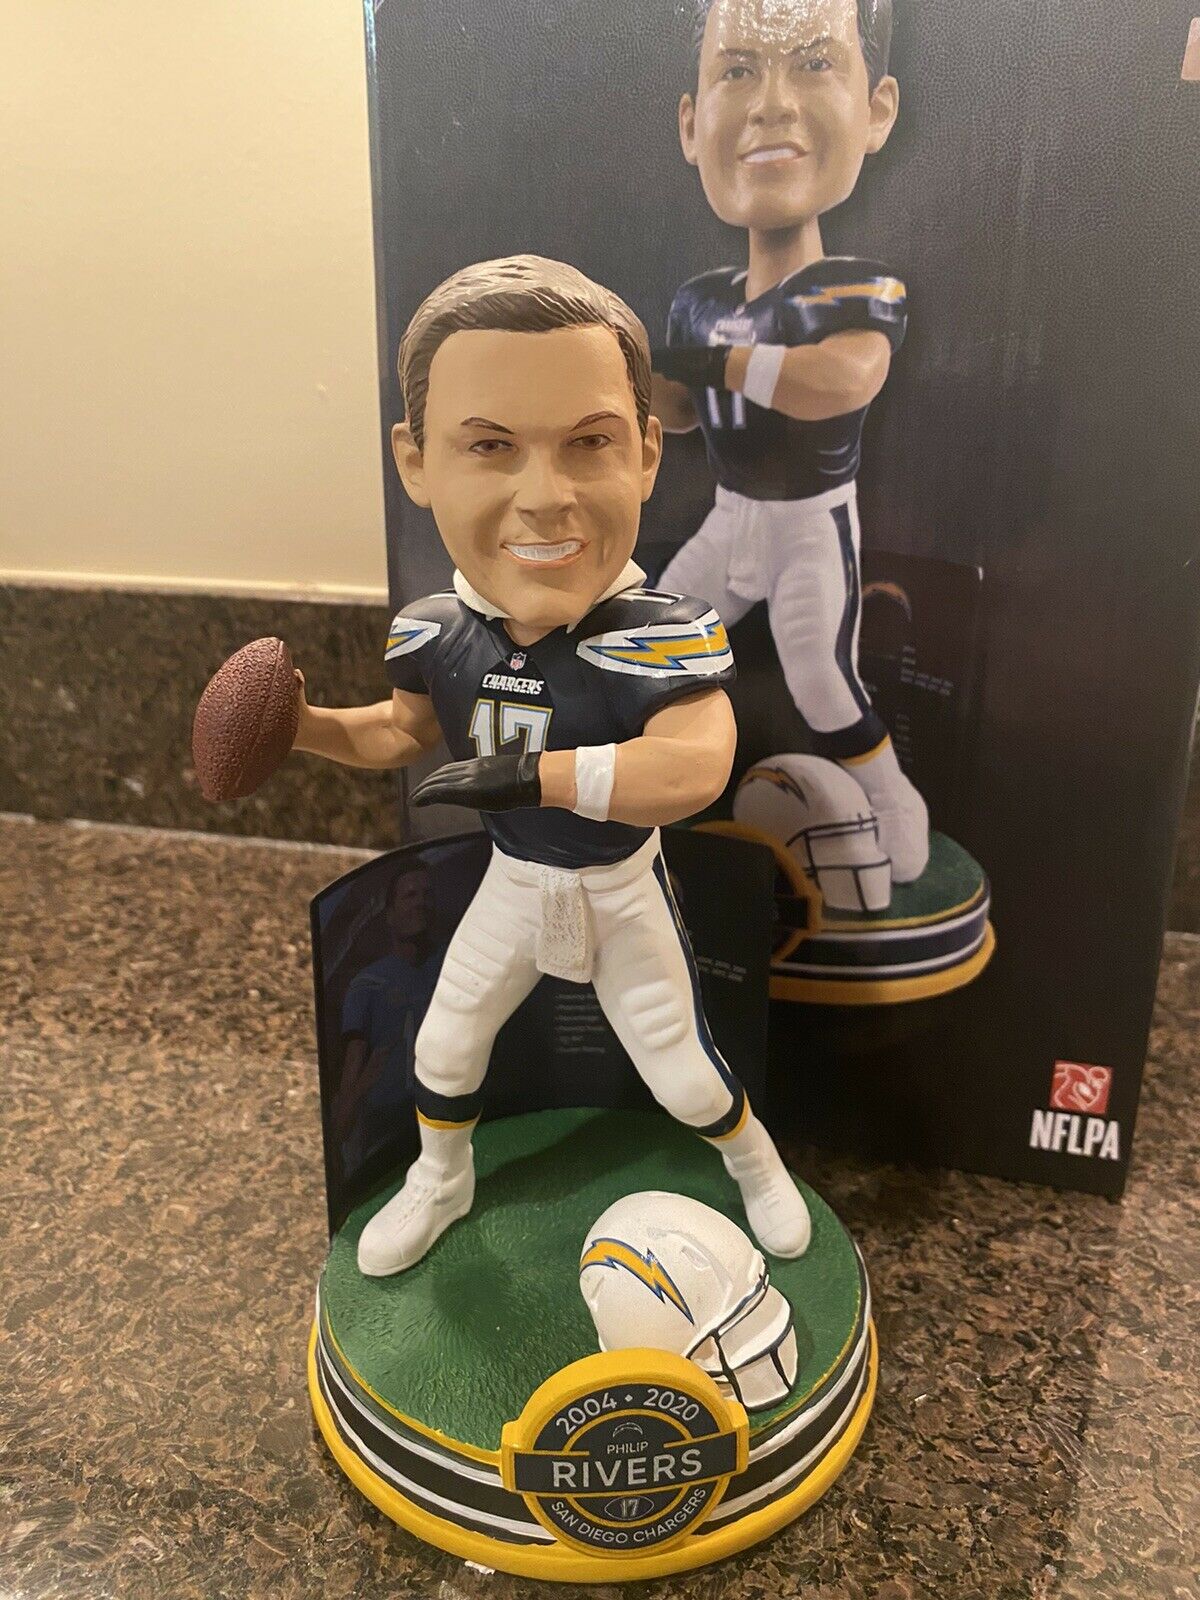 Philip Rivers Nfl Football Chargers /217 Foco Career Stats Retirement Bobblehead